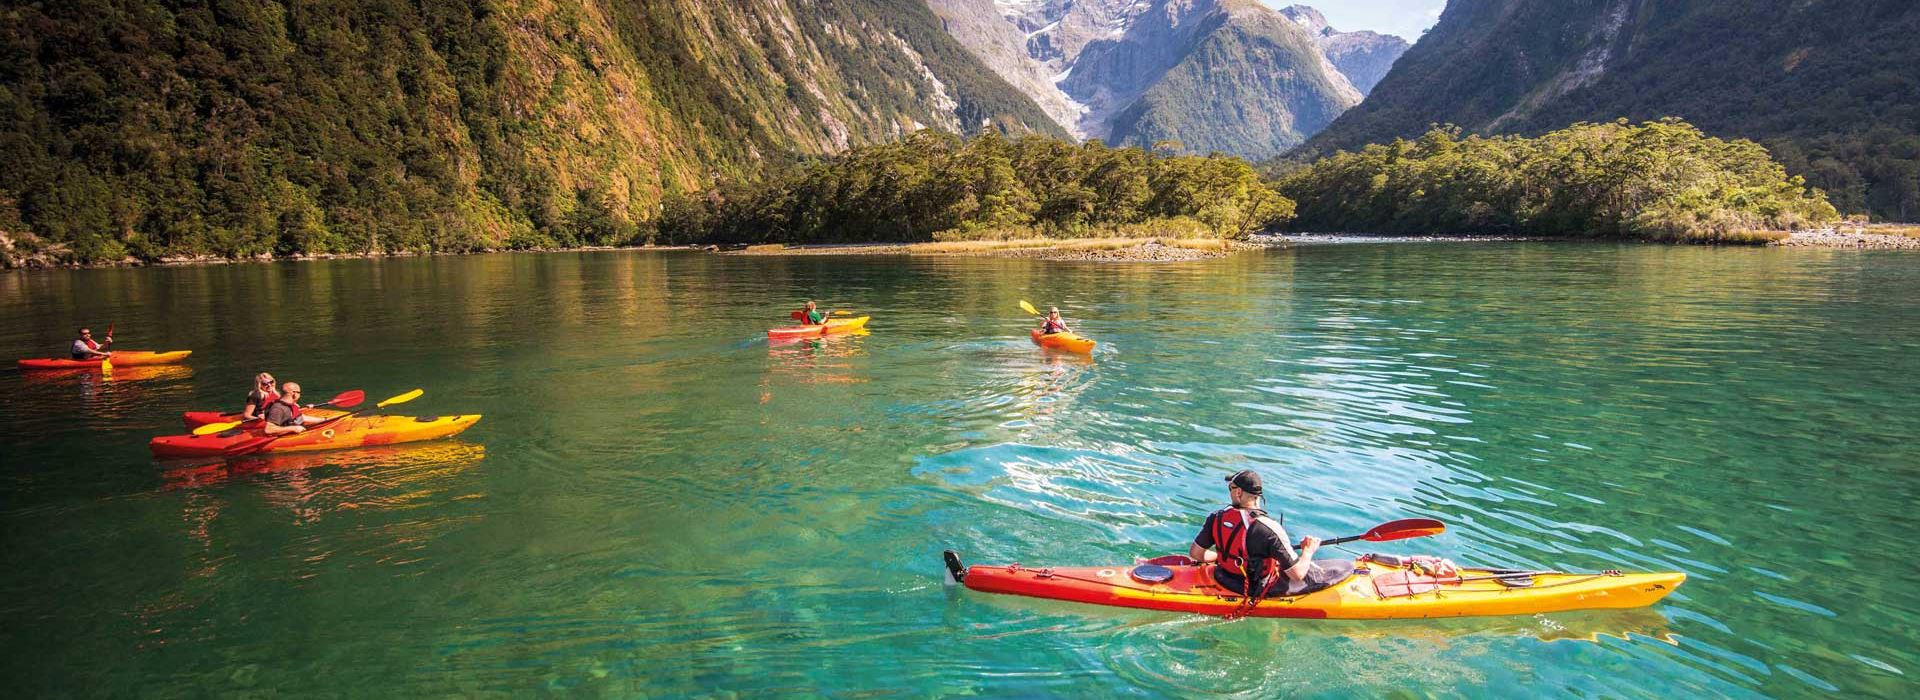 12-Day The Ultimate Family Adventure Tour in the South Island